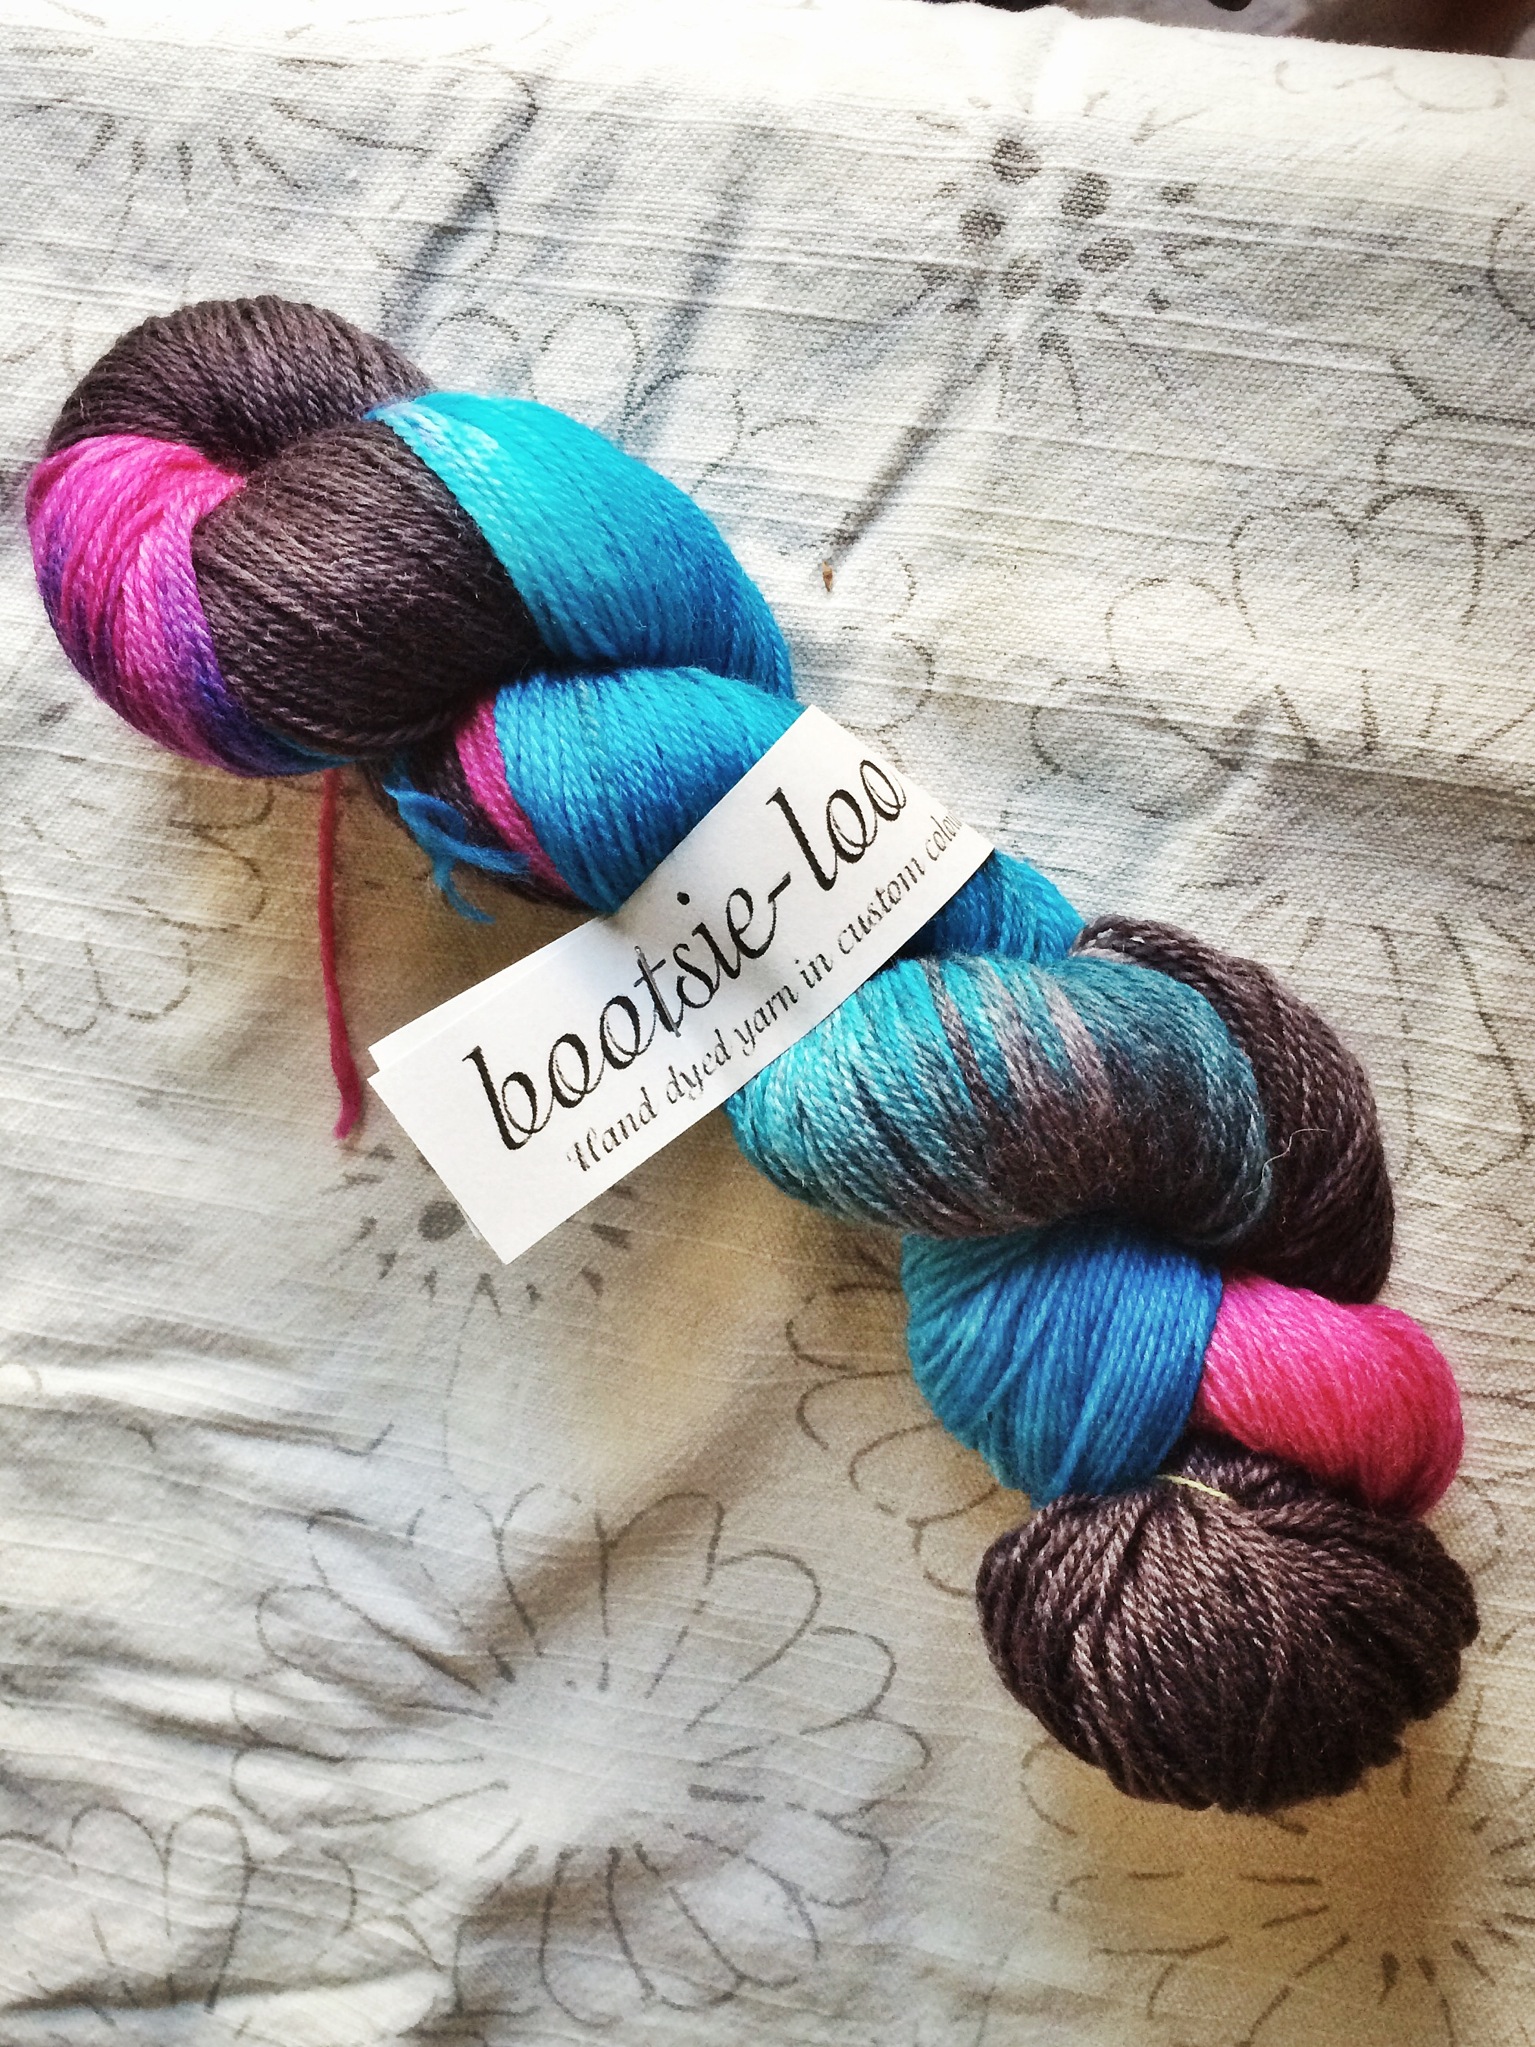 Fingering weight yarn in blue, pink, and grey from Studioloo